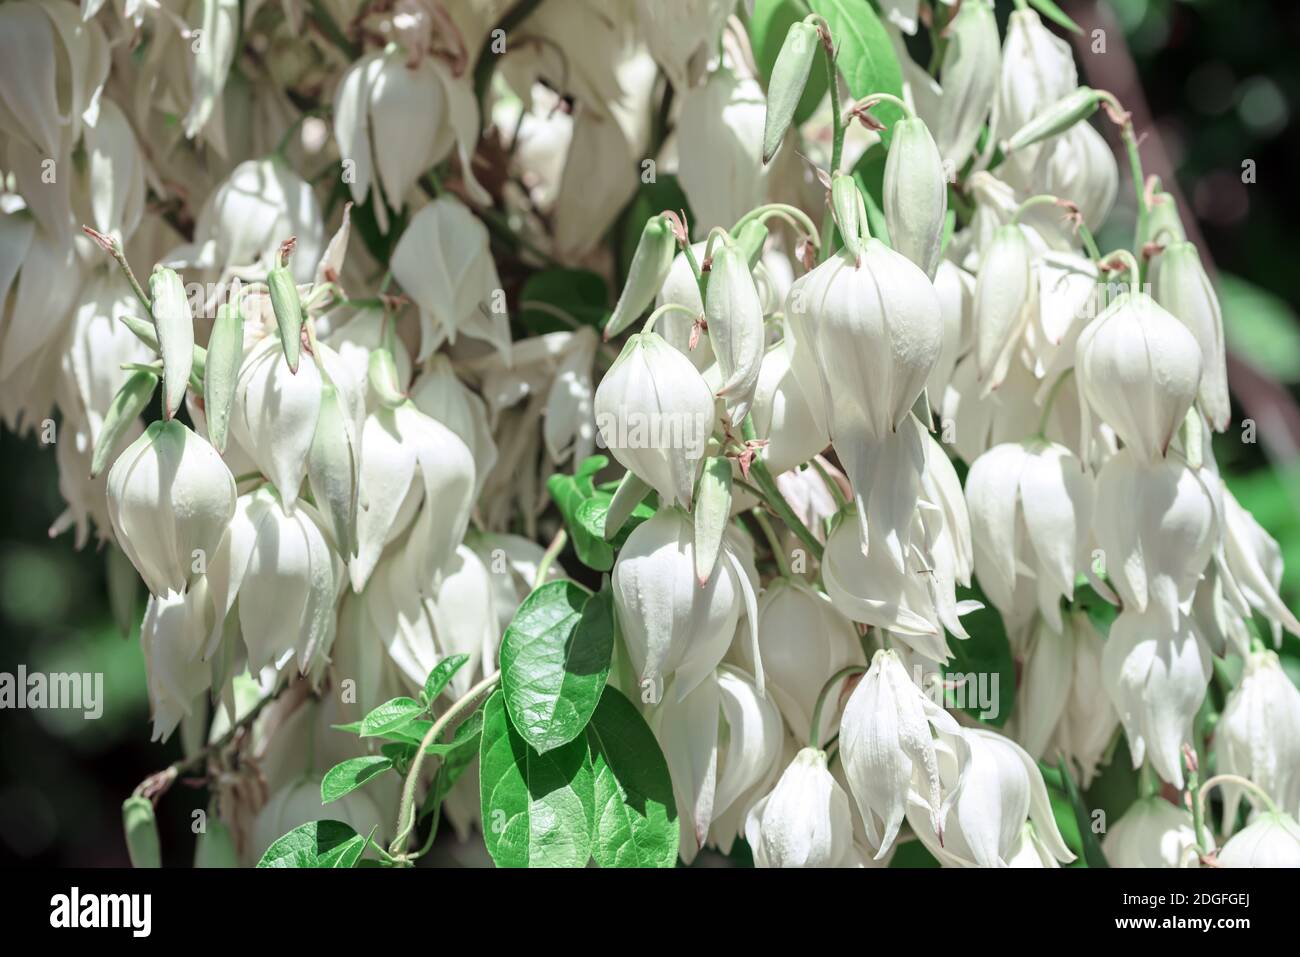 Palm lily Yucca gloriosa. Spanish dagger. Blooming evergreen succulent with white flowers, growing i Stock Photo